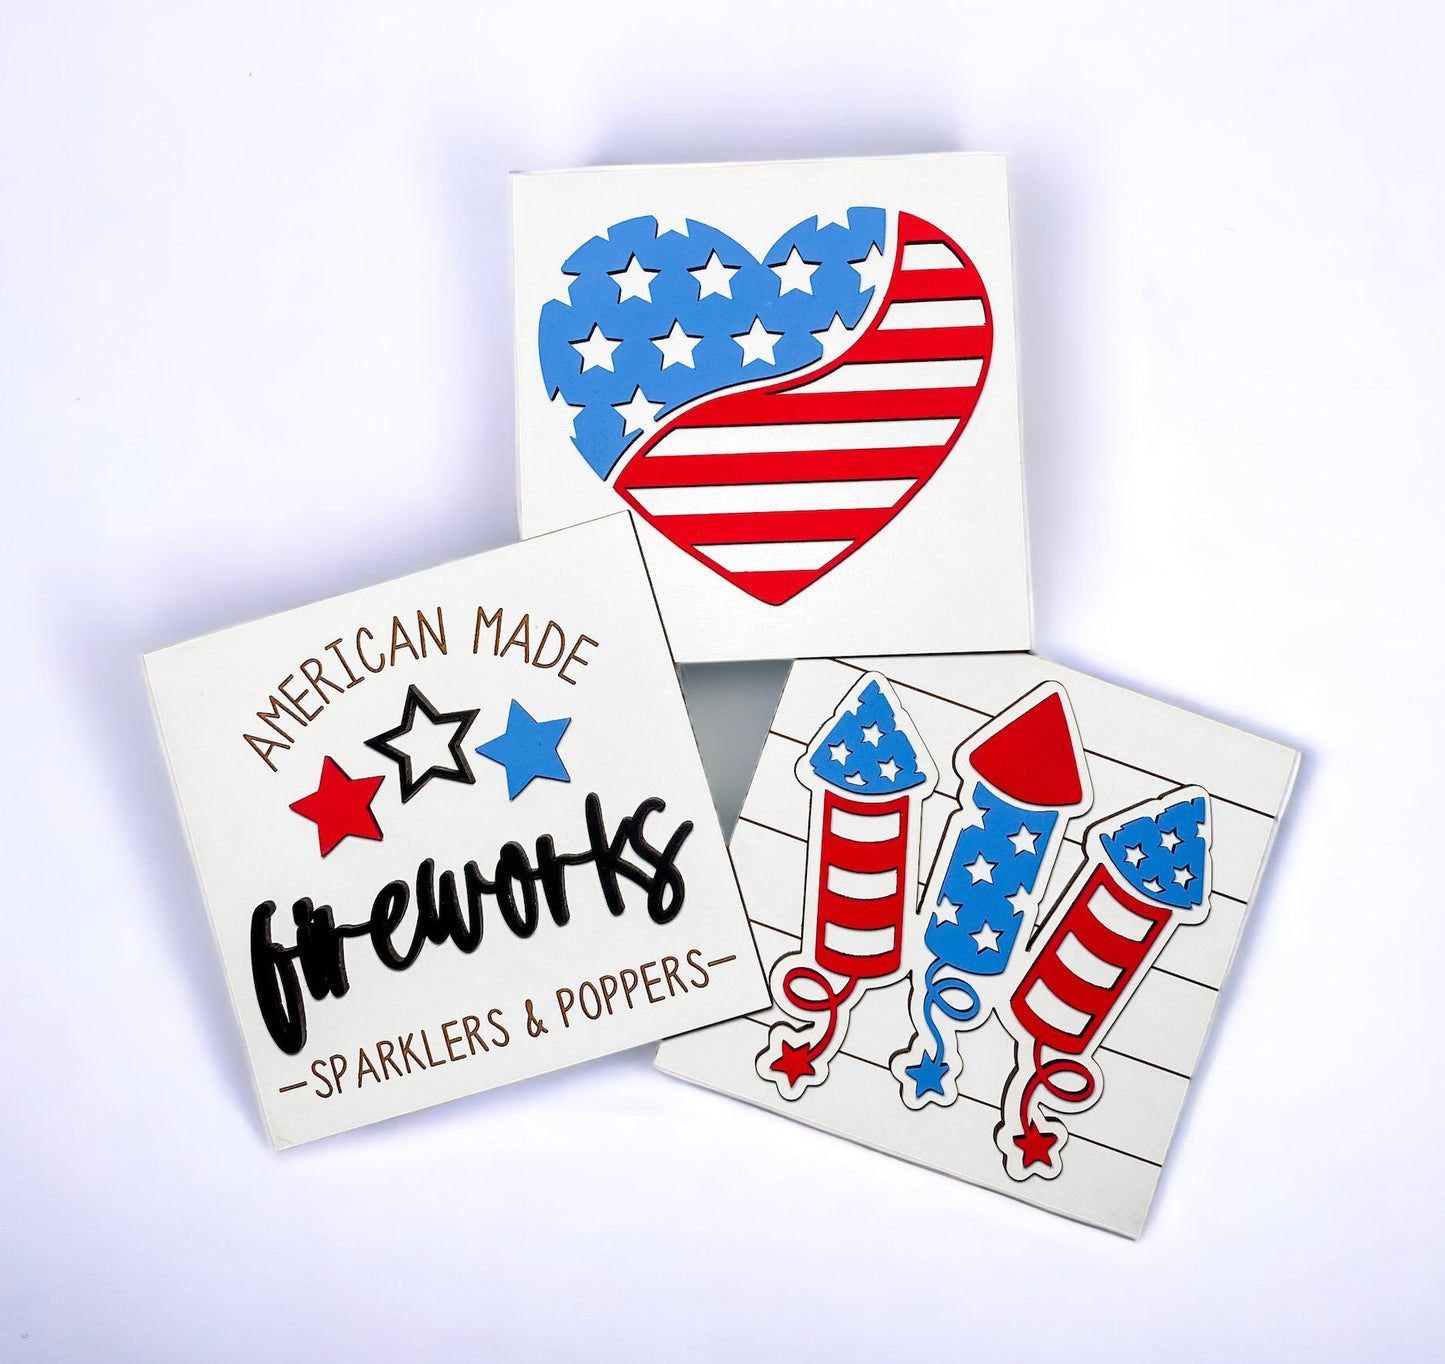 4th of July Tile Inserts for Leaning Ladder and Home Decor - Holiday Decor for Independence Day